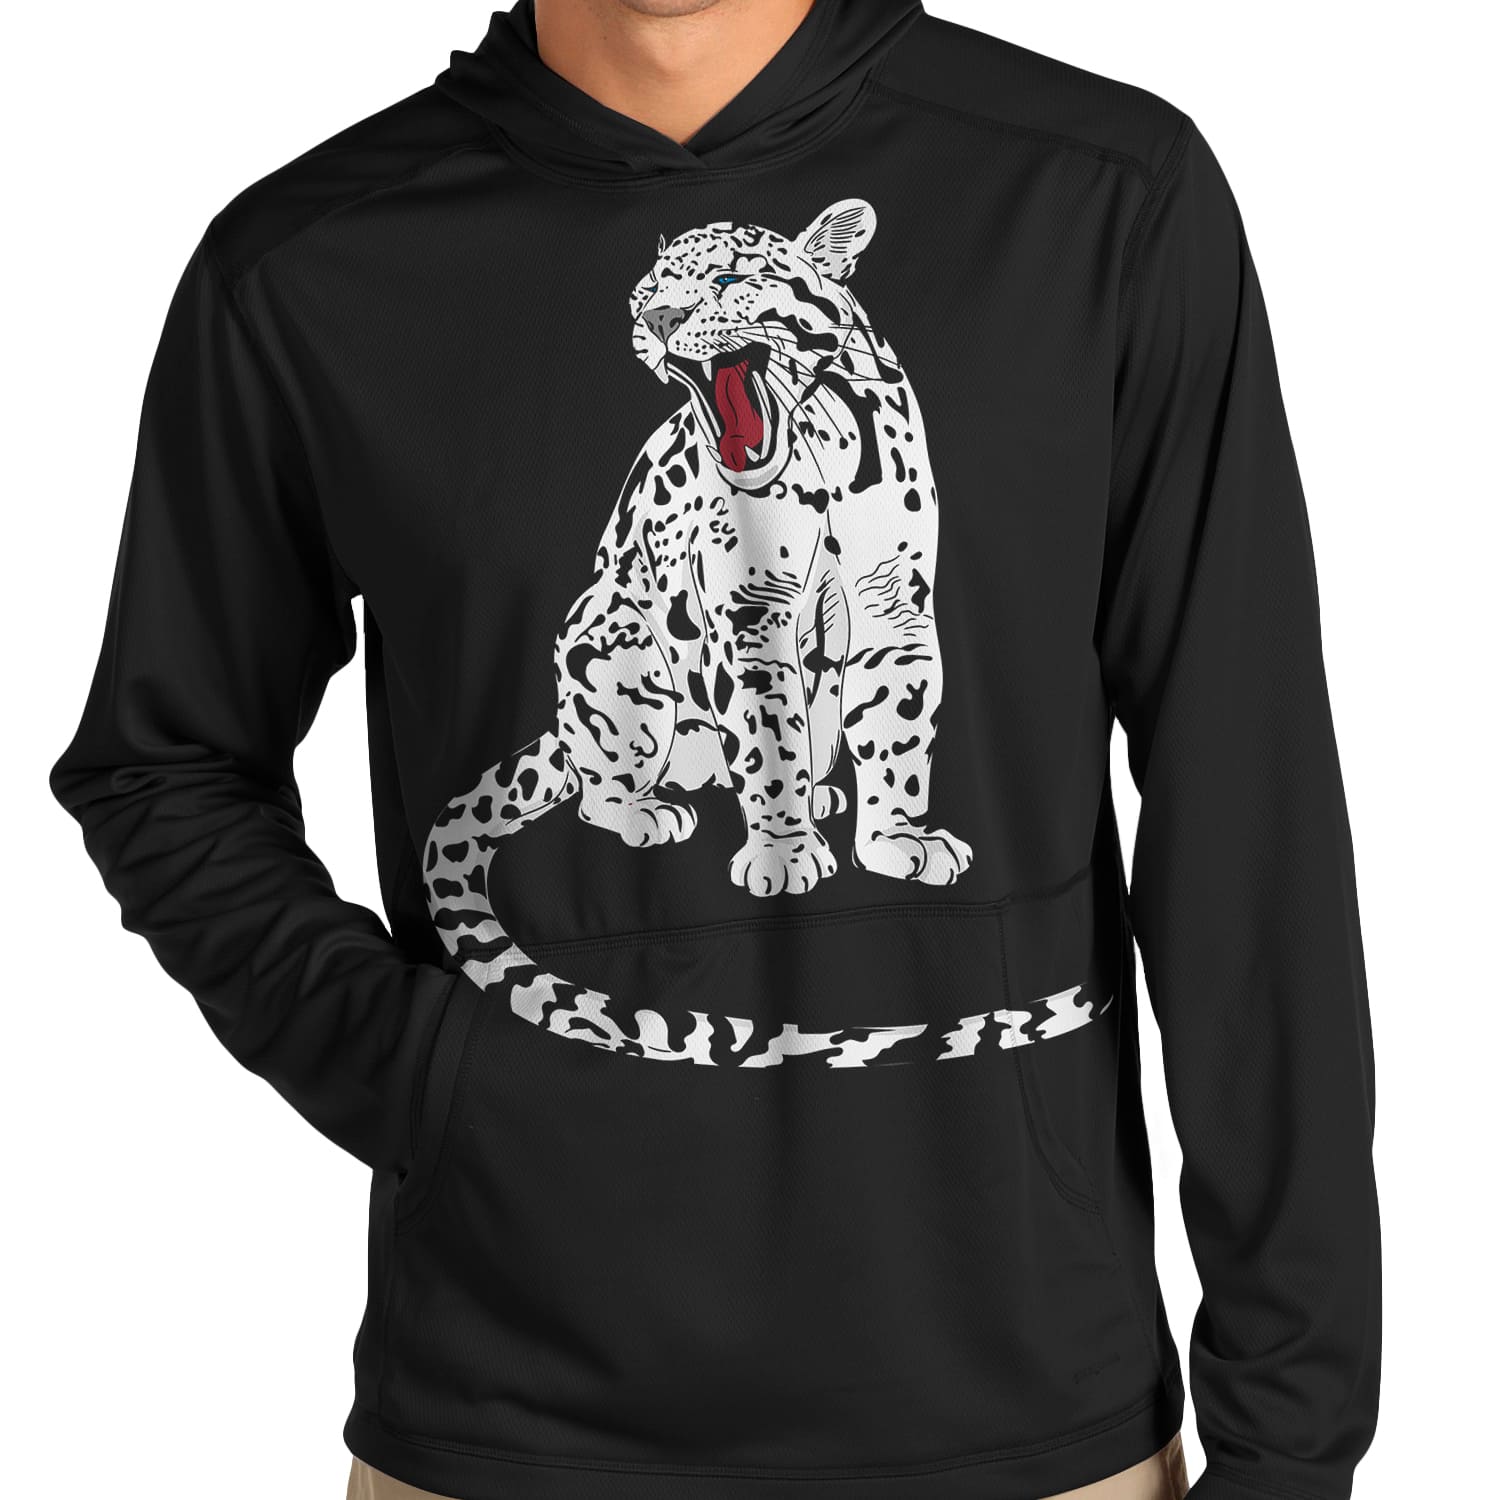 Man wearing a black hoodie with a white leopard on it.